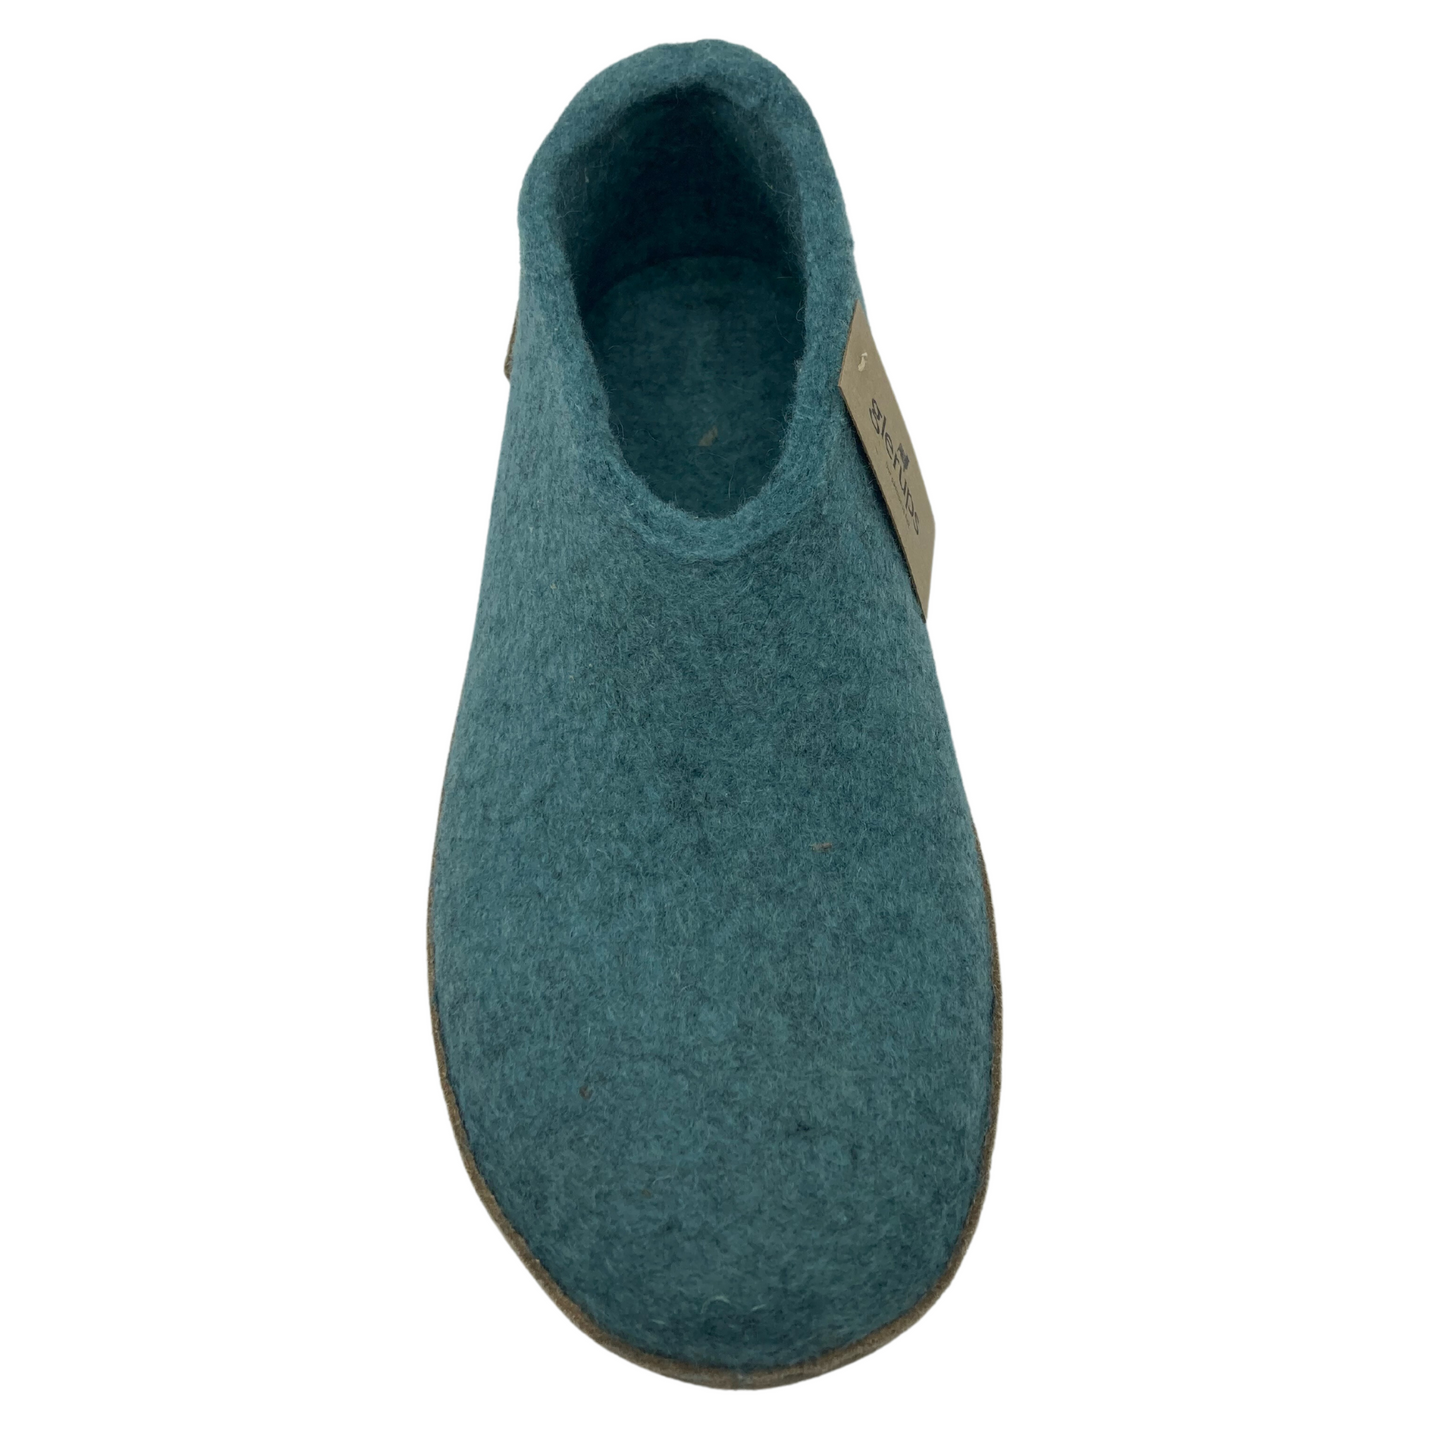 Top view of felted wool shoe with rounded toe